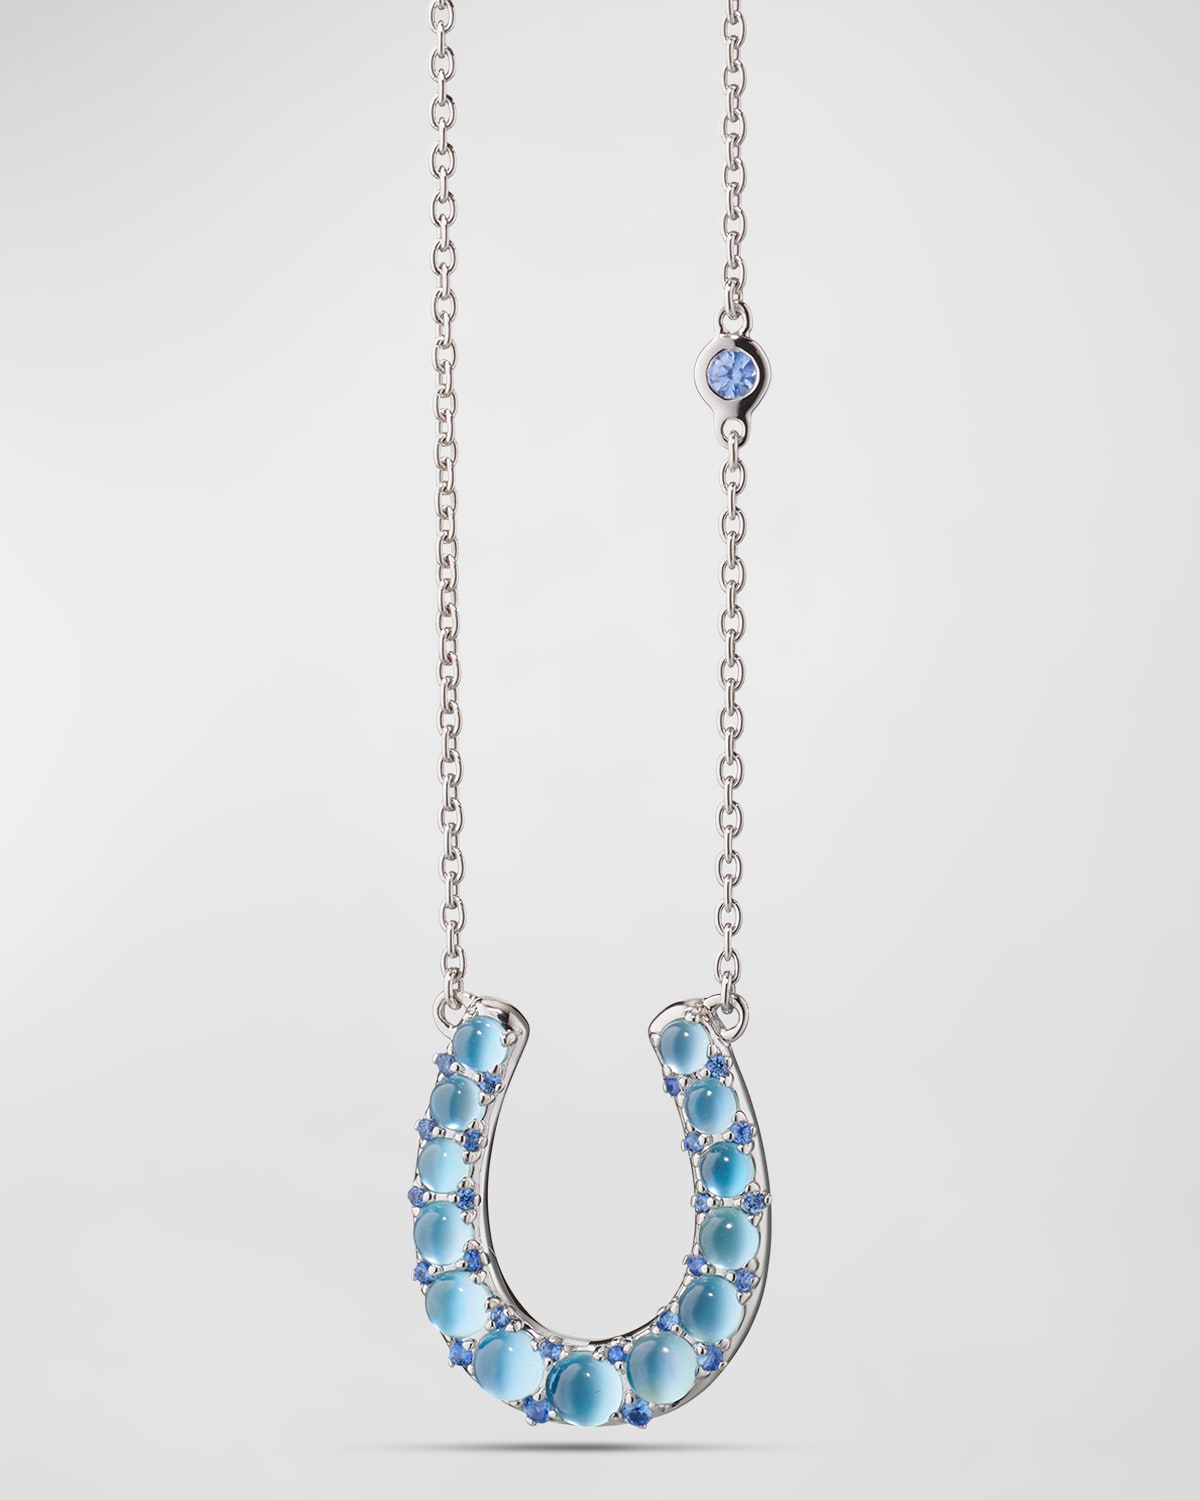 Sterling Silver Horseshoe Necklace with Topaz, Mother-of-Pearl, and Sapphire